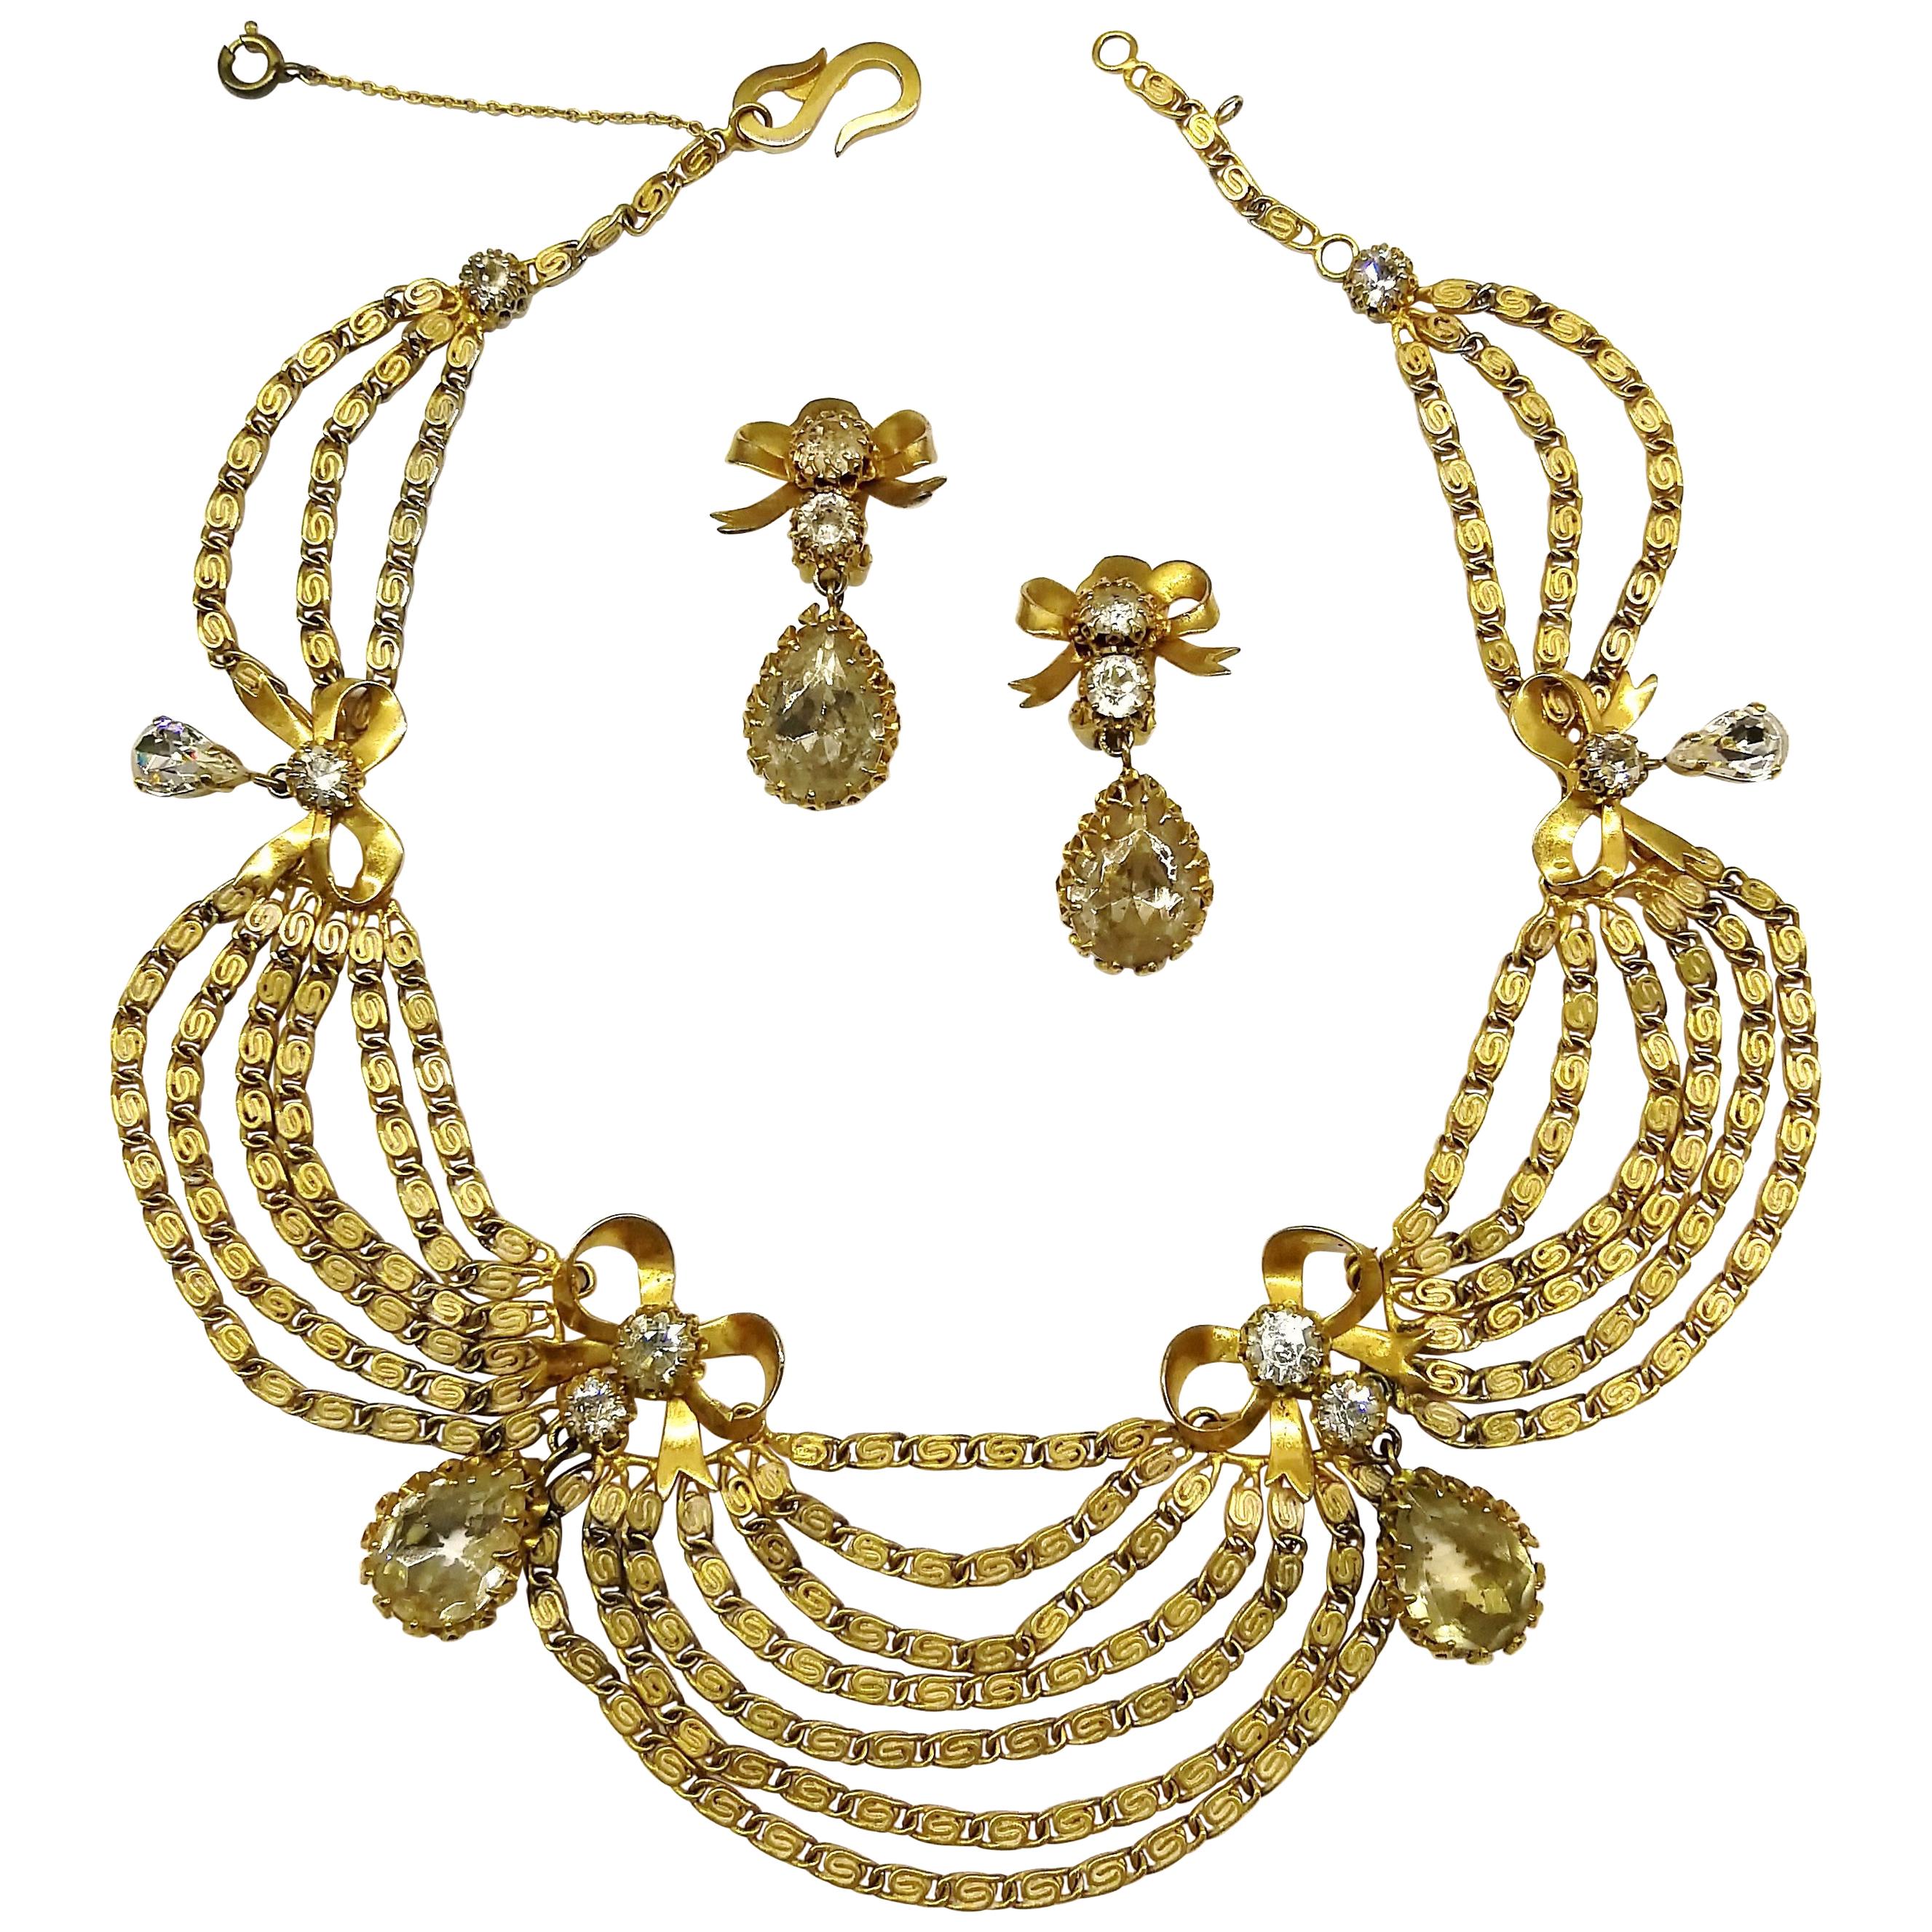 An 'Empire' style necklace and earrings, Christian Dior by Michel Maer, 1950s